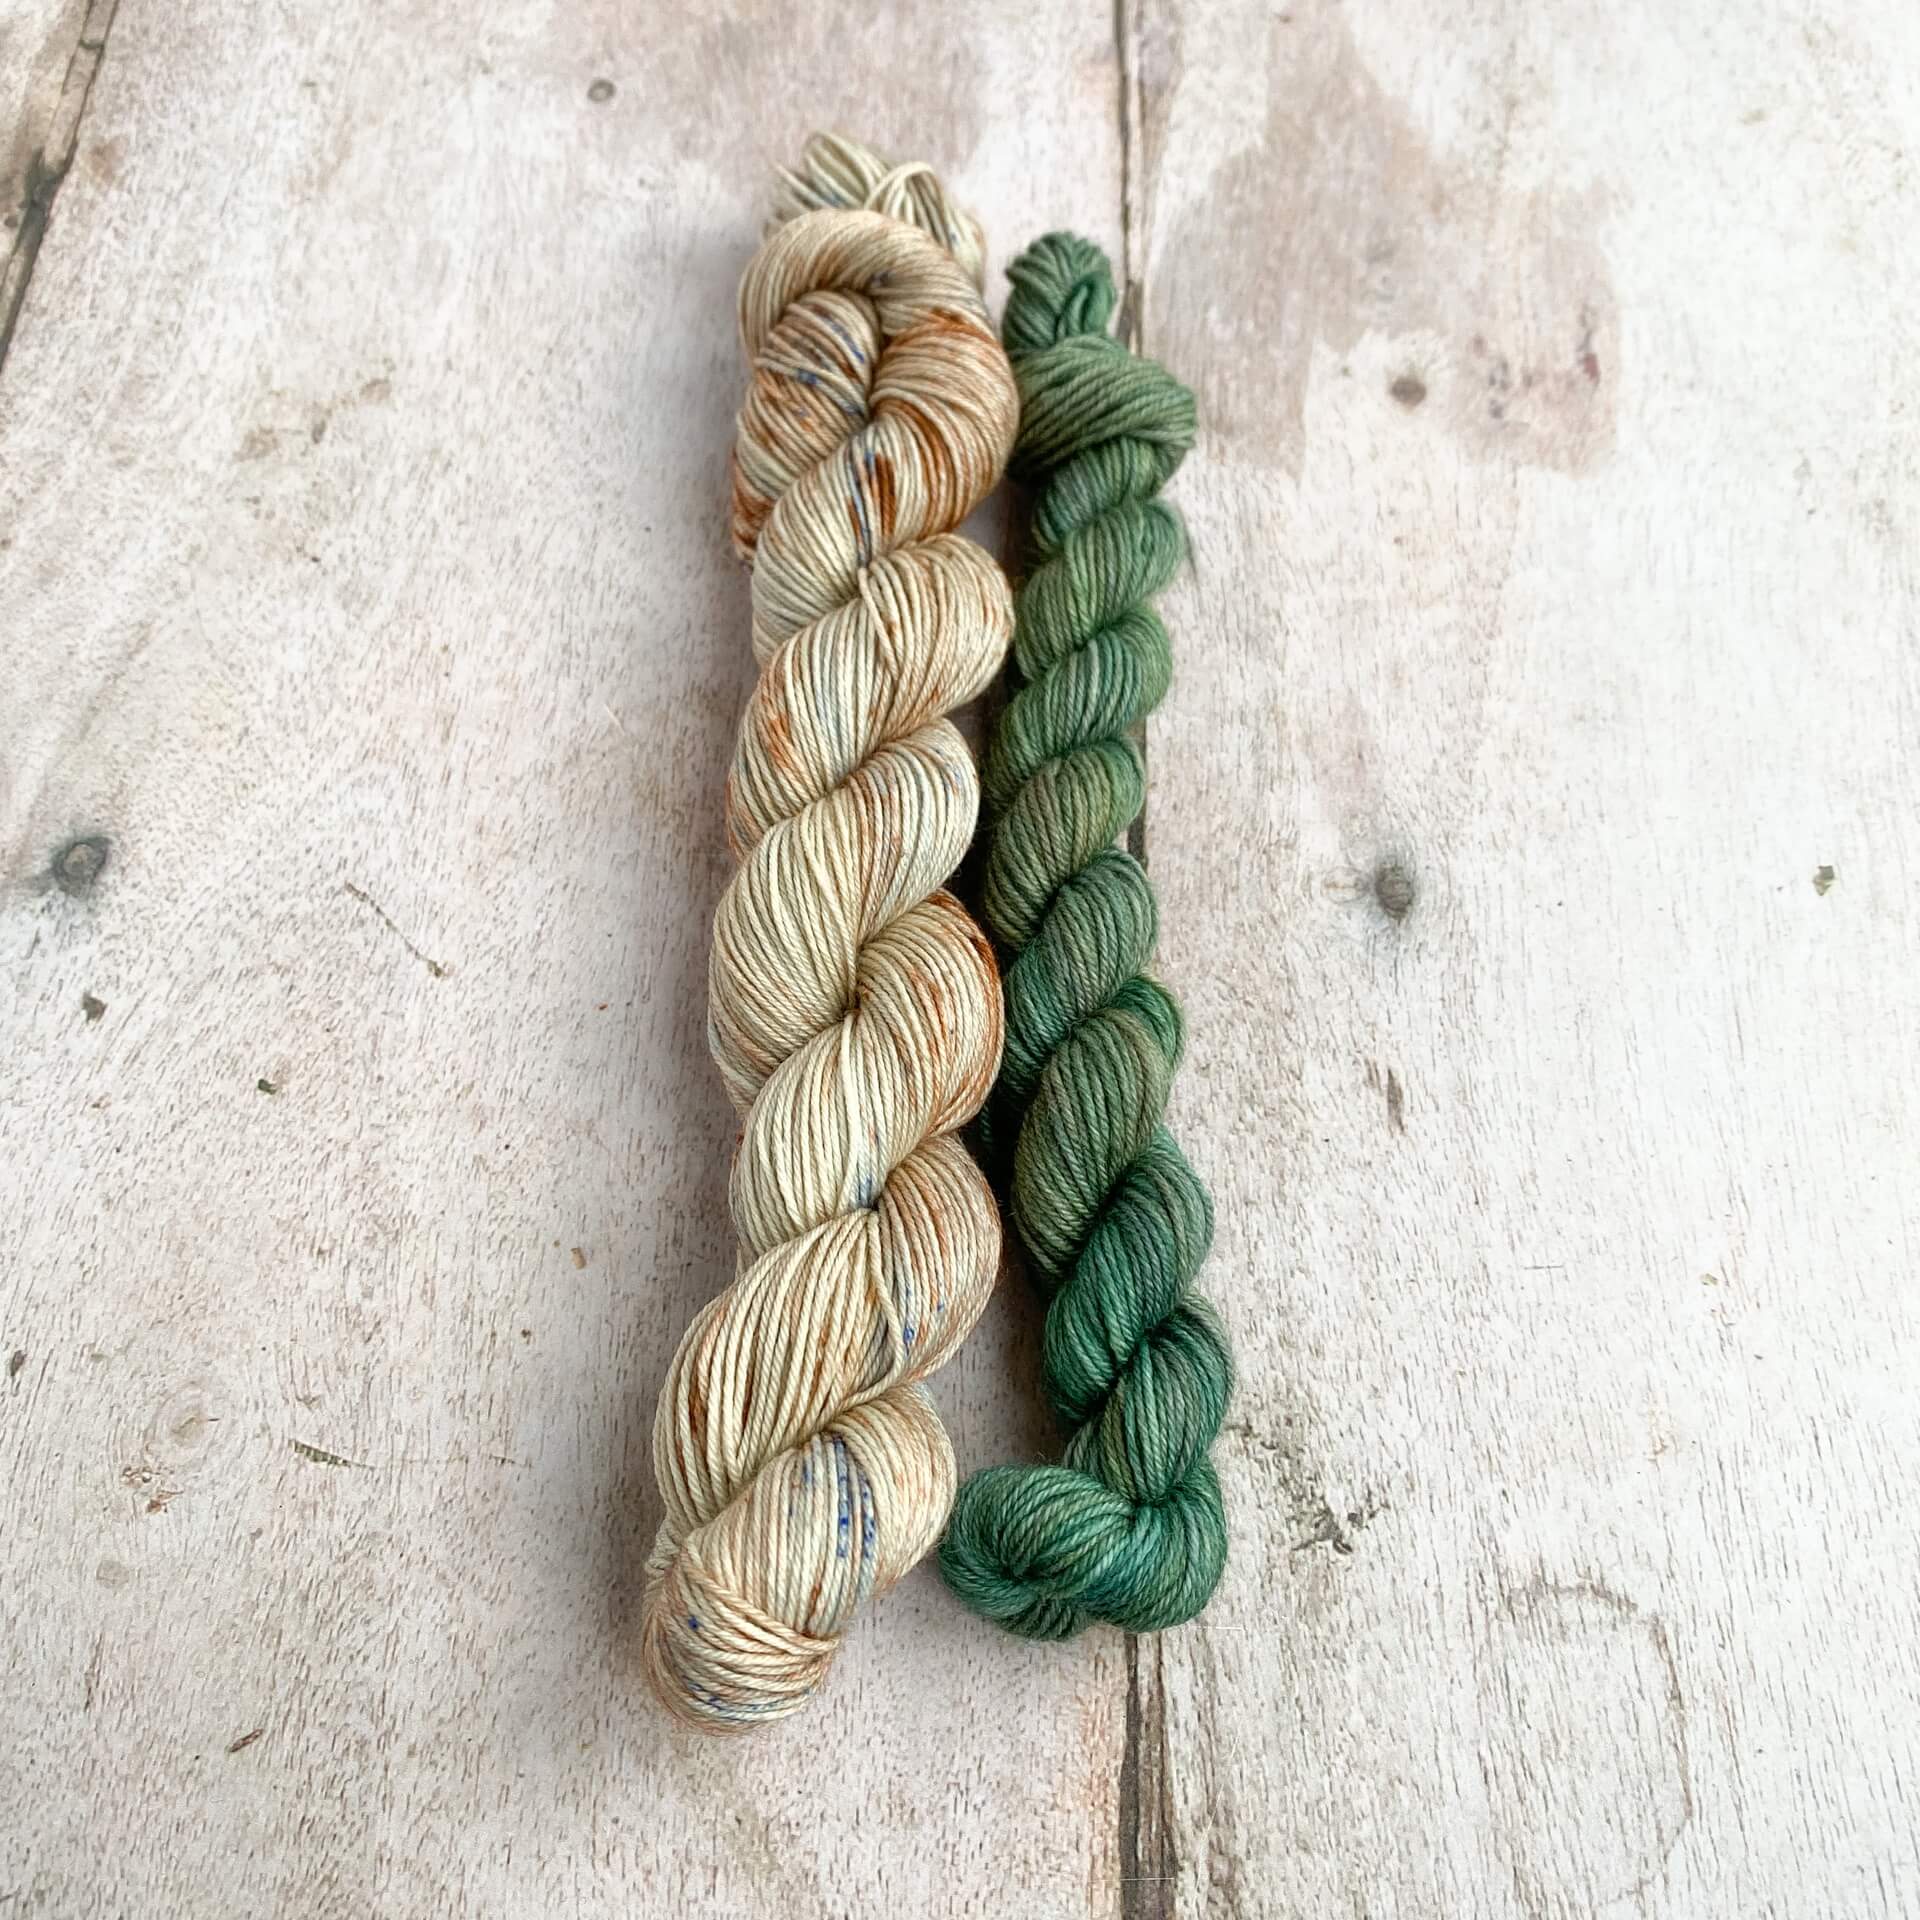 Two skeins of yarn in colours of brown, speckled blue and green sit on a wooden table. 